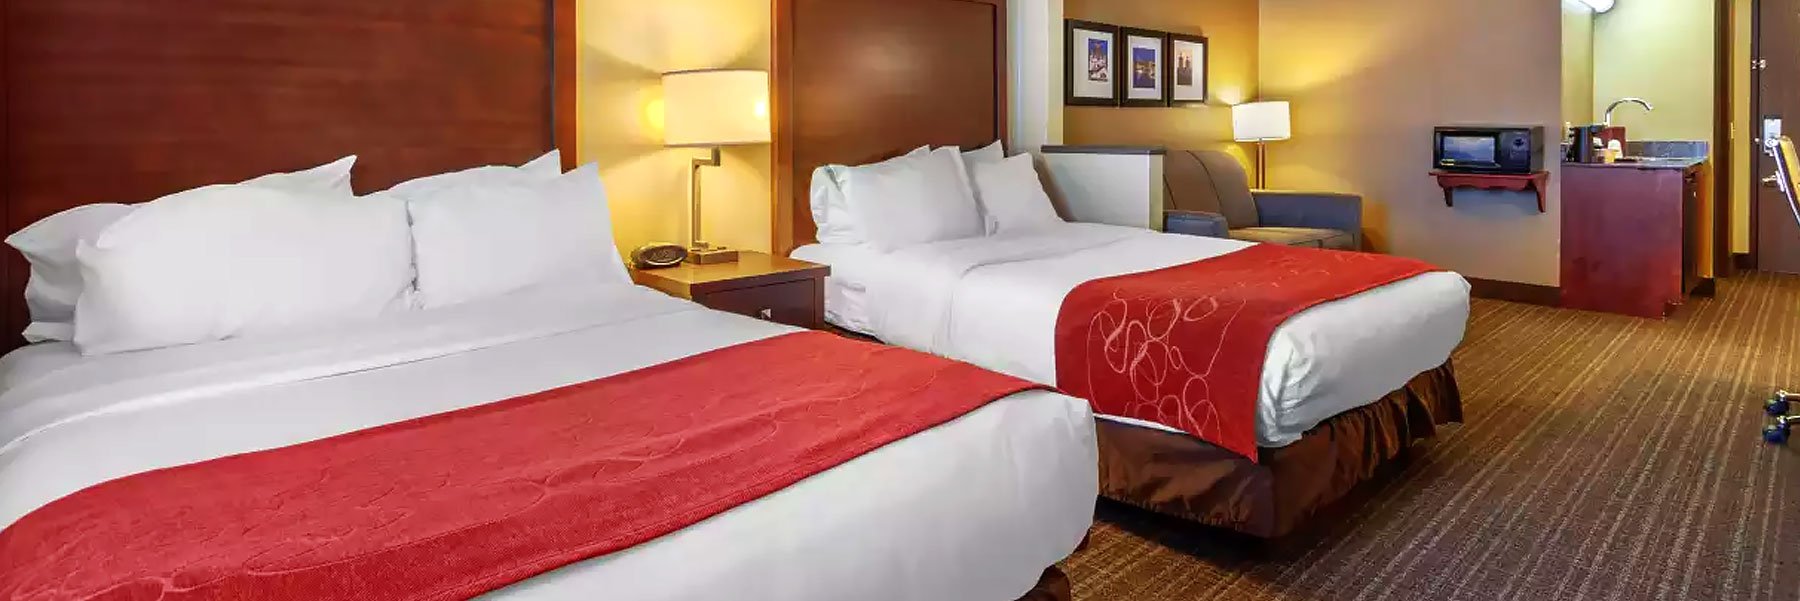 Bay Hotel Accommodations | Comfort Suites Green Bay